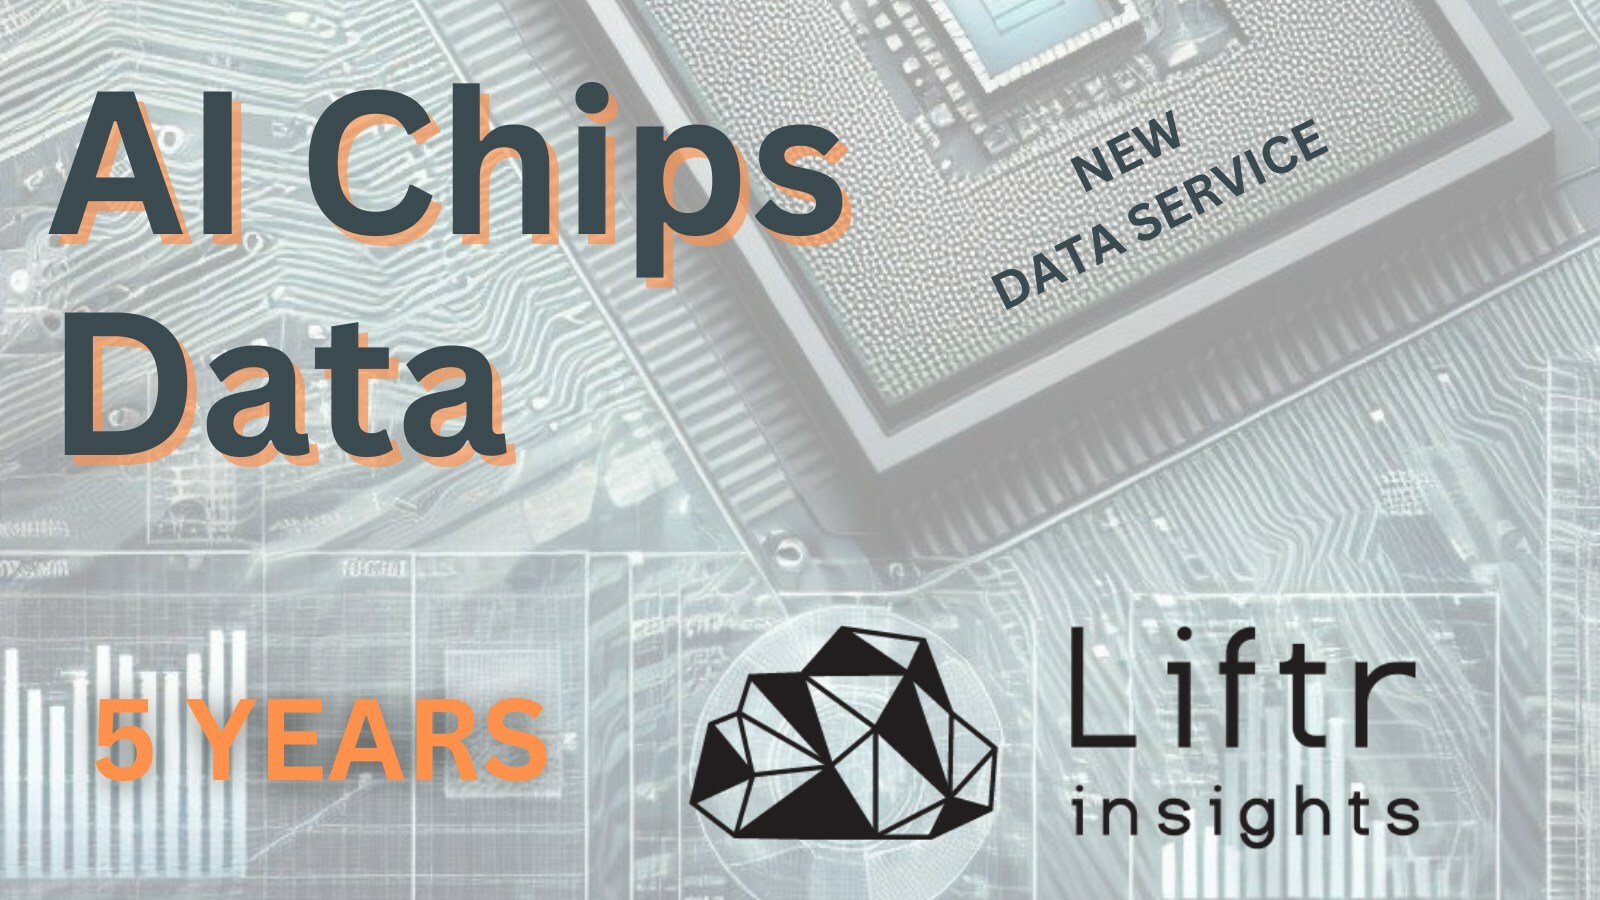 Liftr Insights adds new AI semiconductor data service with 5 years of history